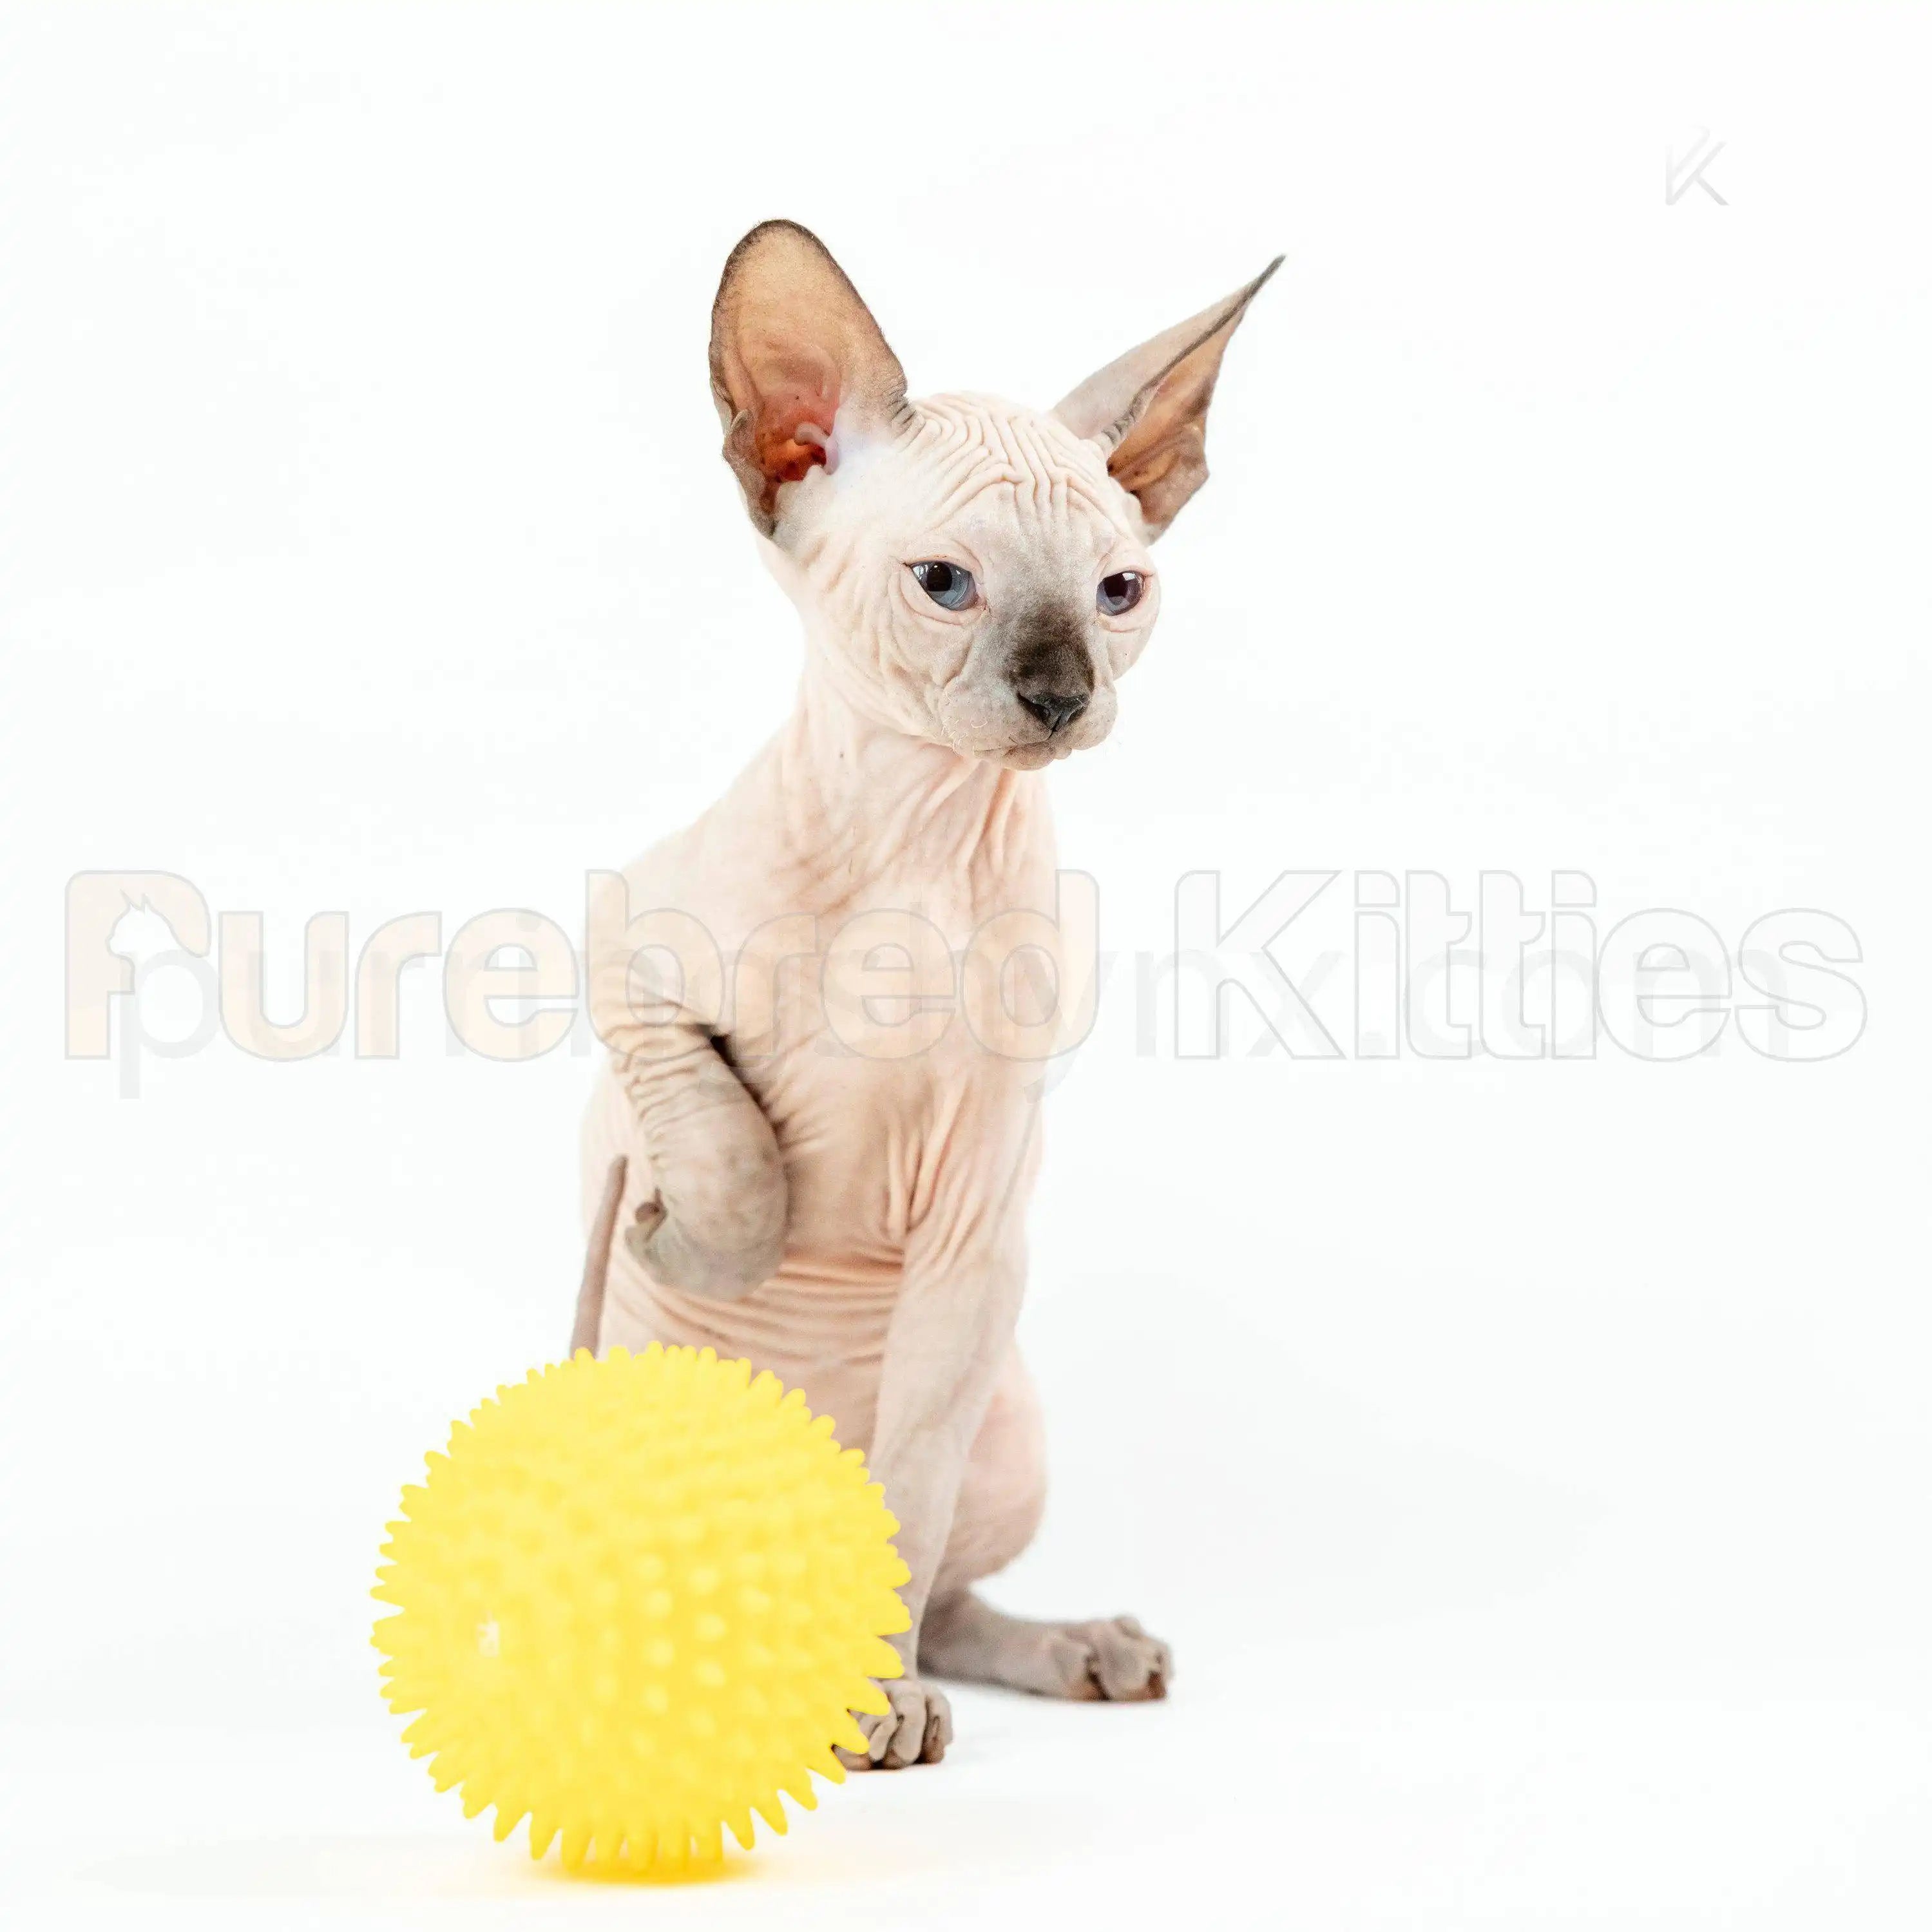 "Santa" Male Sphynx Kitten | 3.5 Month Old | Available for Pick Up and Delivery From March 20th - [Purebred Kitties],[buy kitten],[adopt cat]